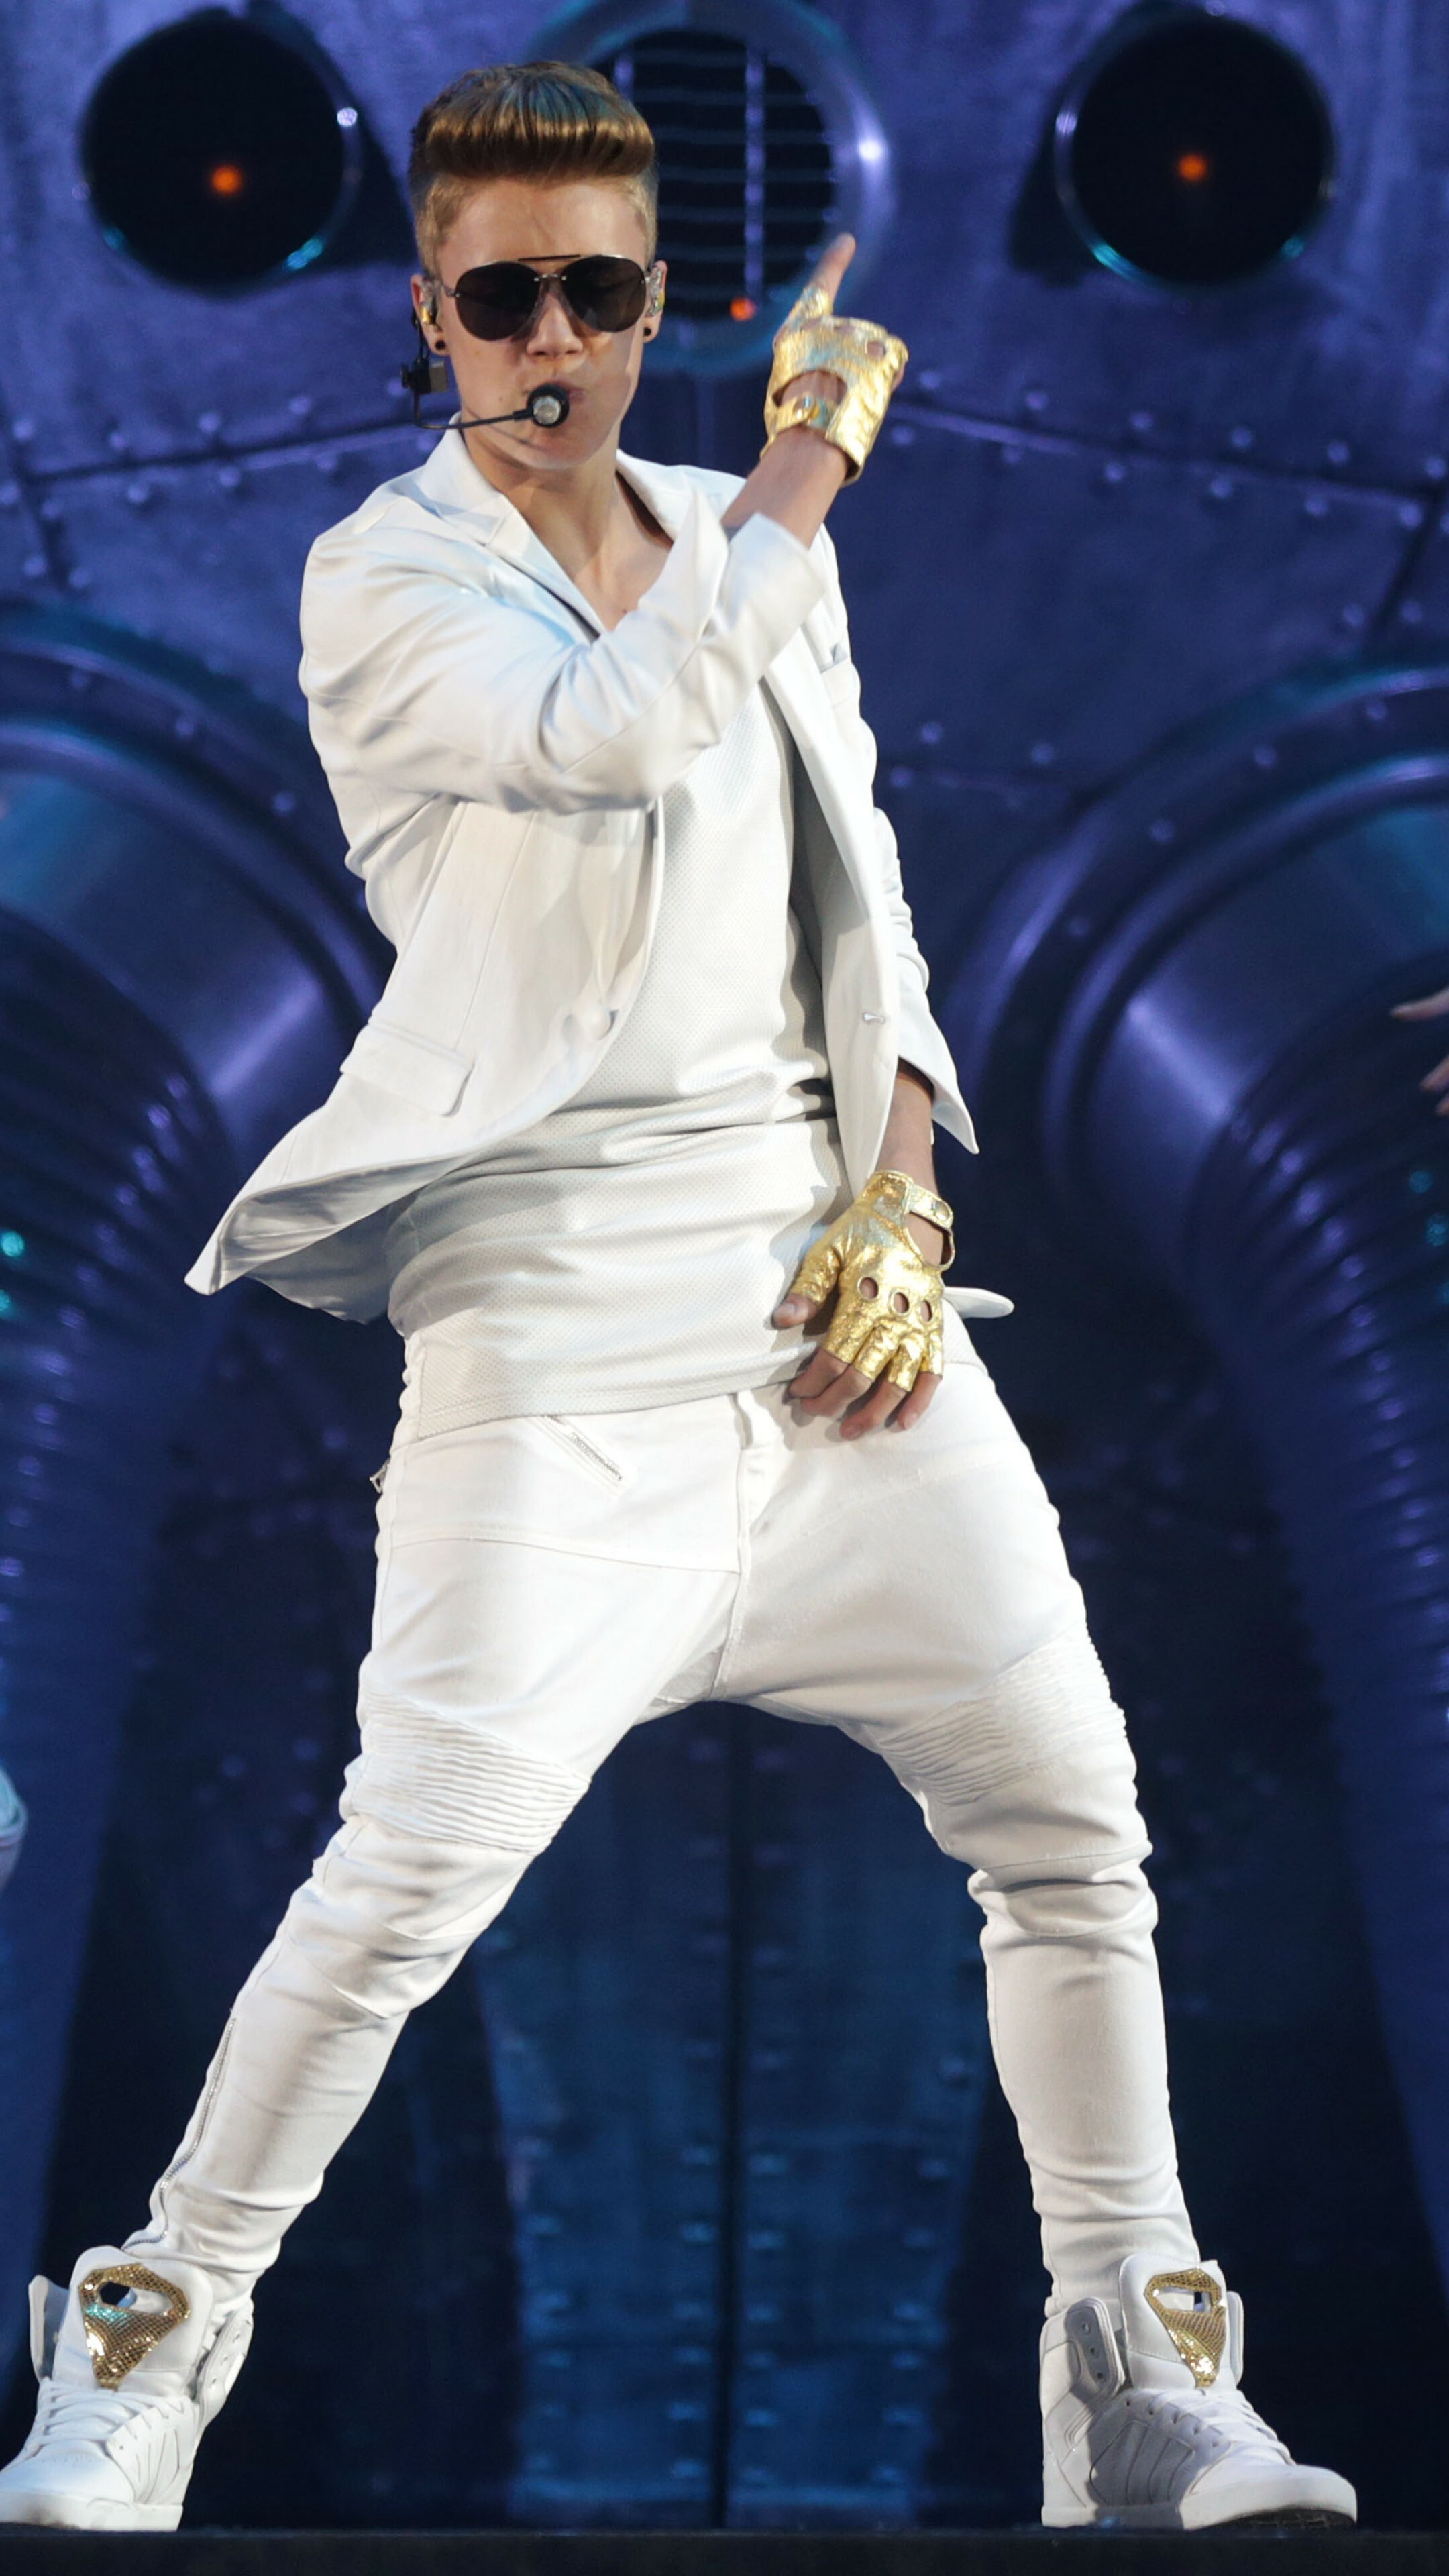 Justin Bieber: Canadian singer, Discovered by American Record industry entrepreneur Scooter Braun, Celebrities. 2160x3840 4K Wallpaper.